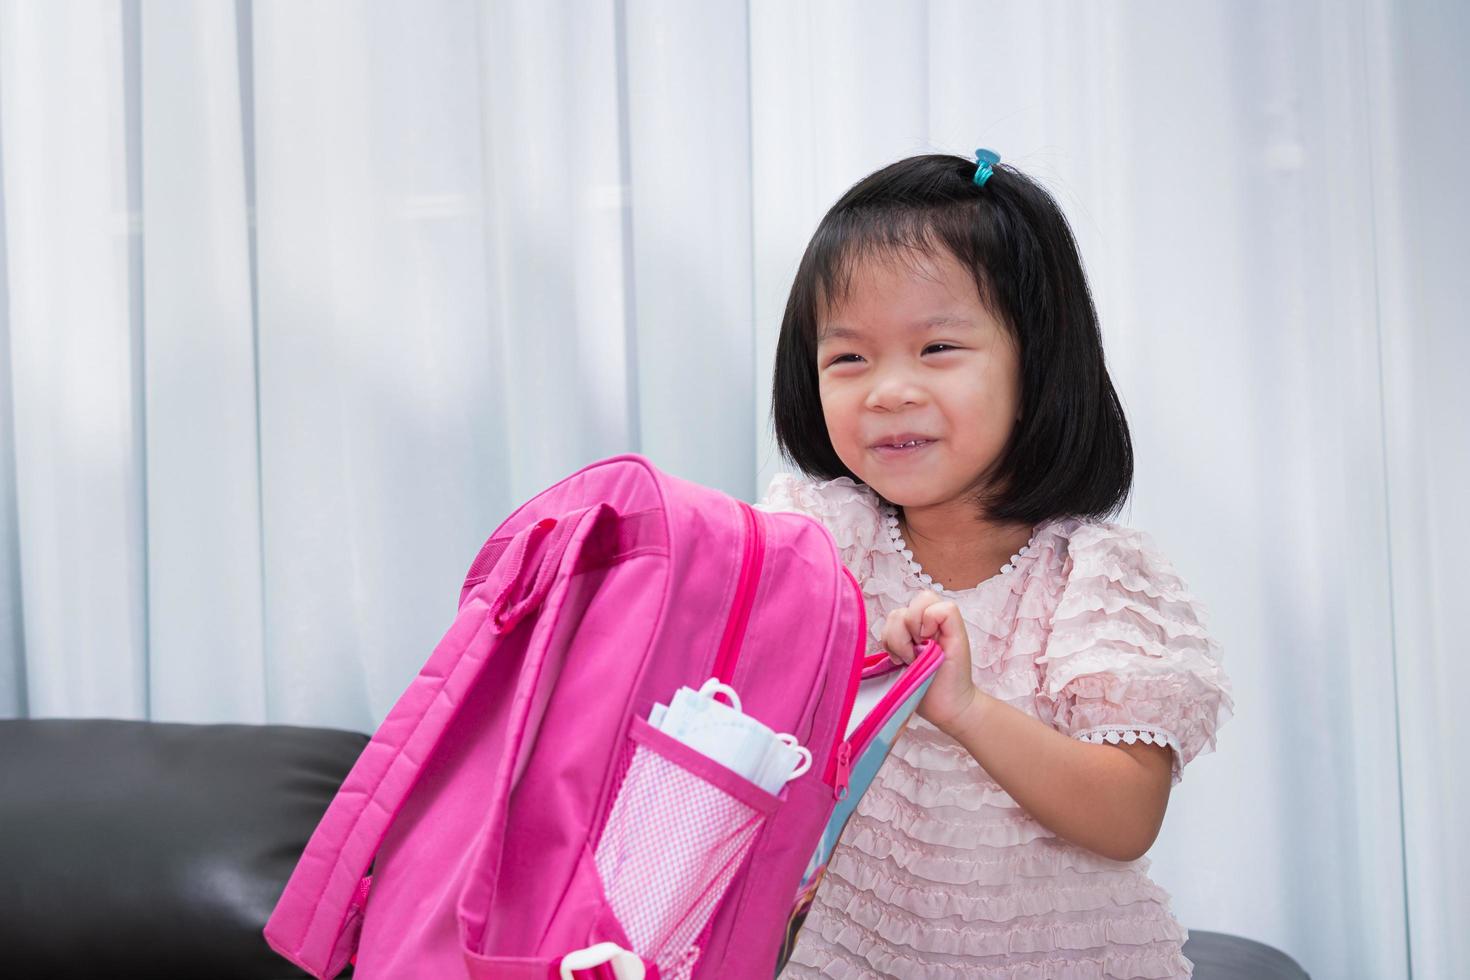 Kindergarten girl enjoyed preparing her pink school bags to go back to school. Medical mask is on side of bag. Empty space to enter text. Kid aged 4 years old. photo